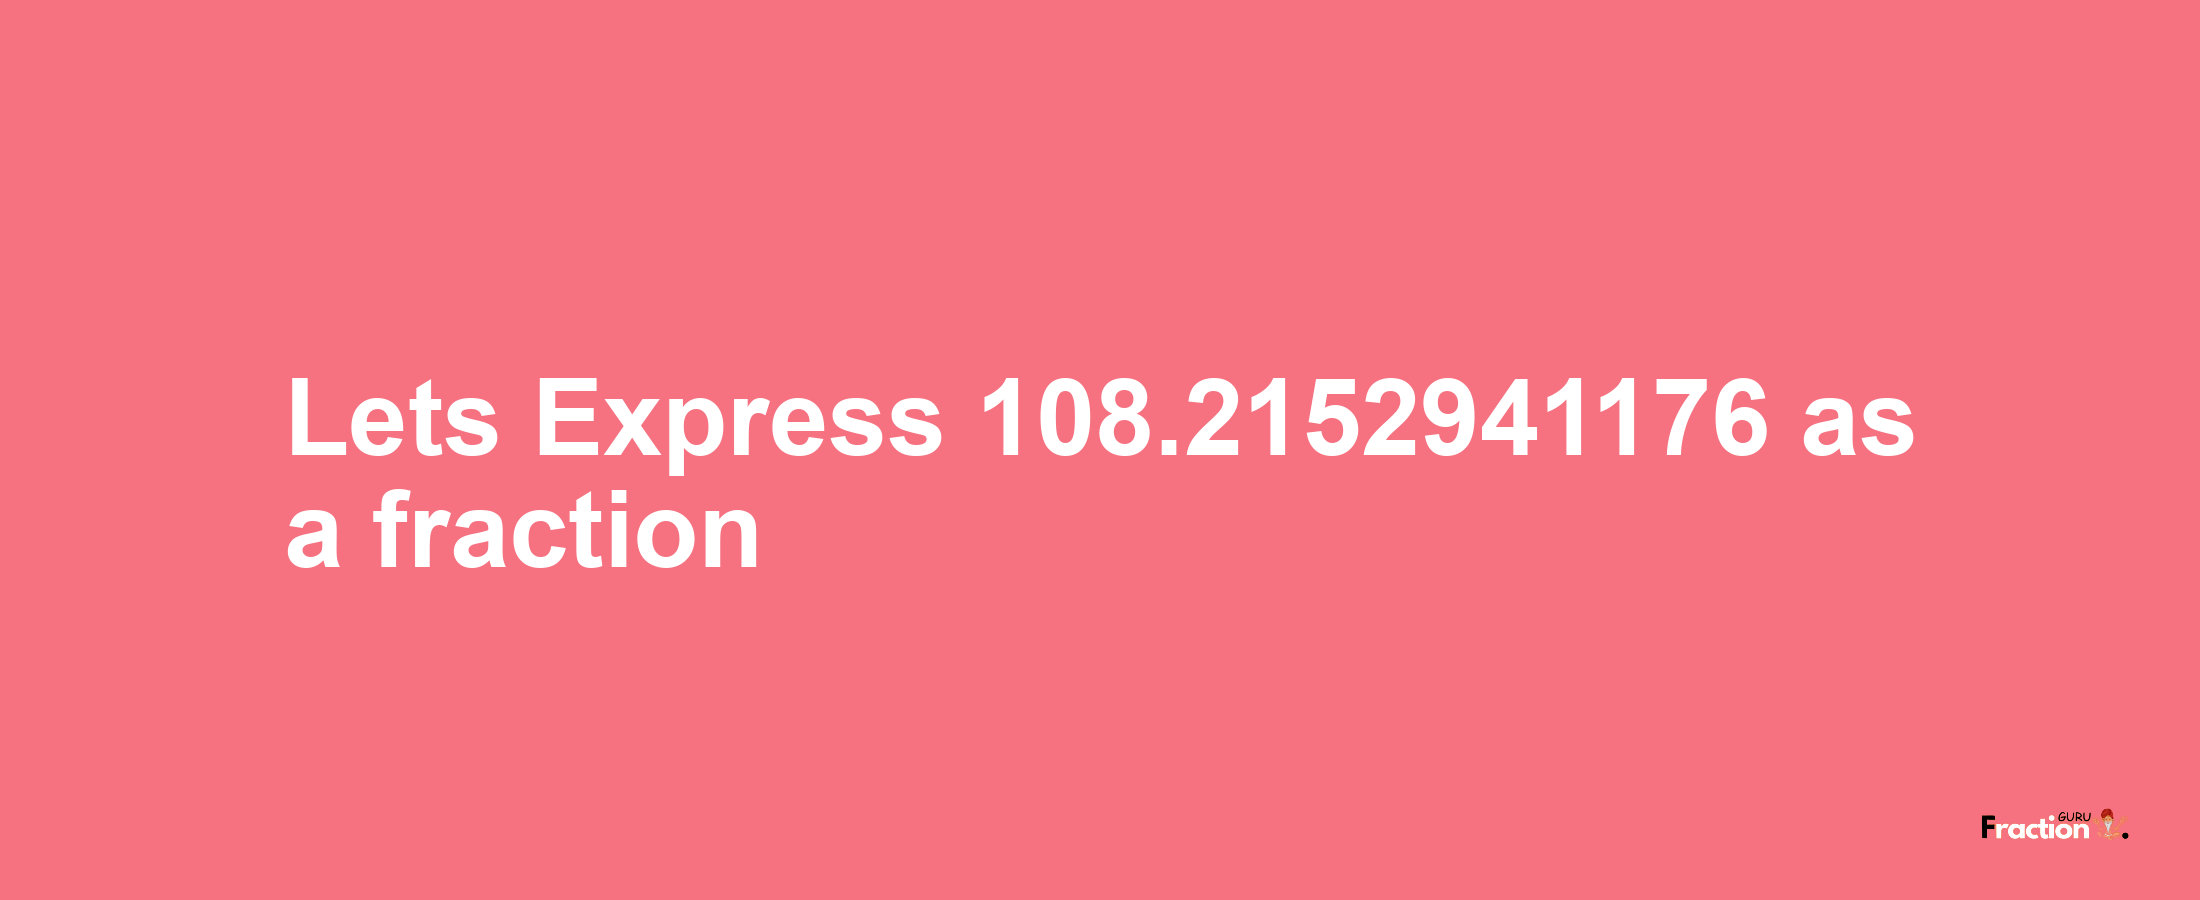 Lets Express 108.2152941176 as afraction